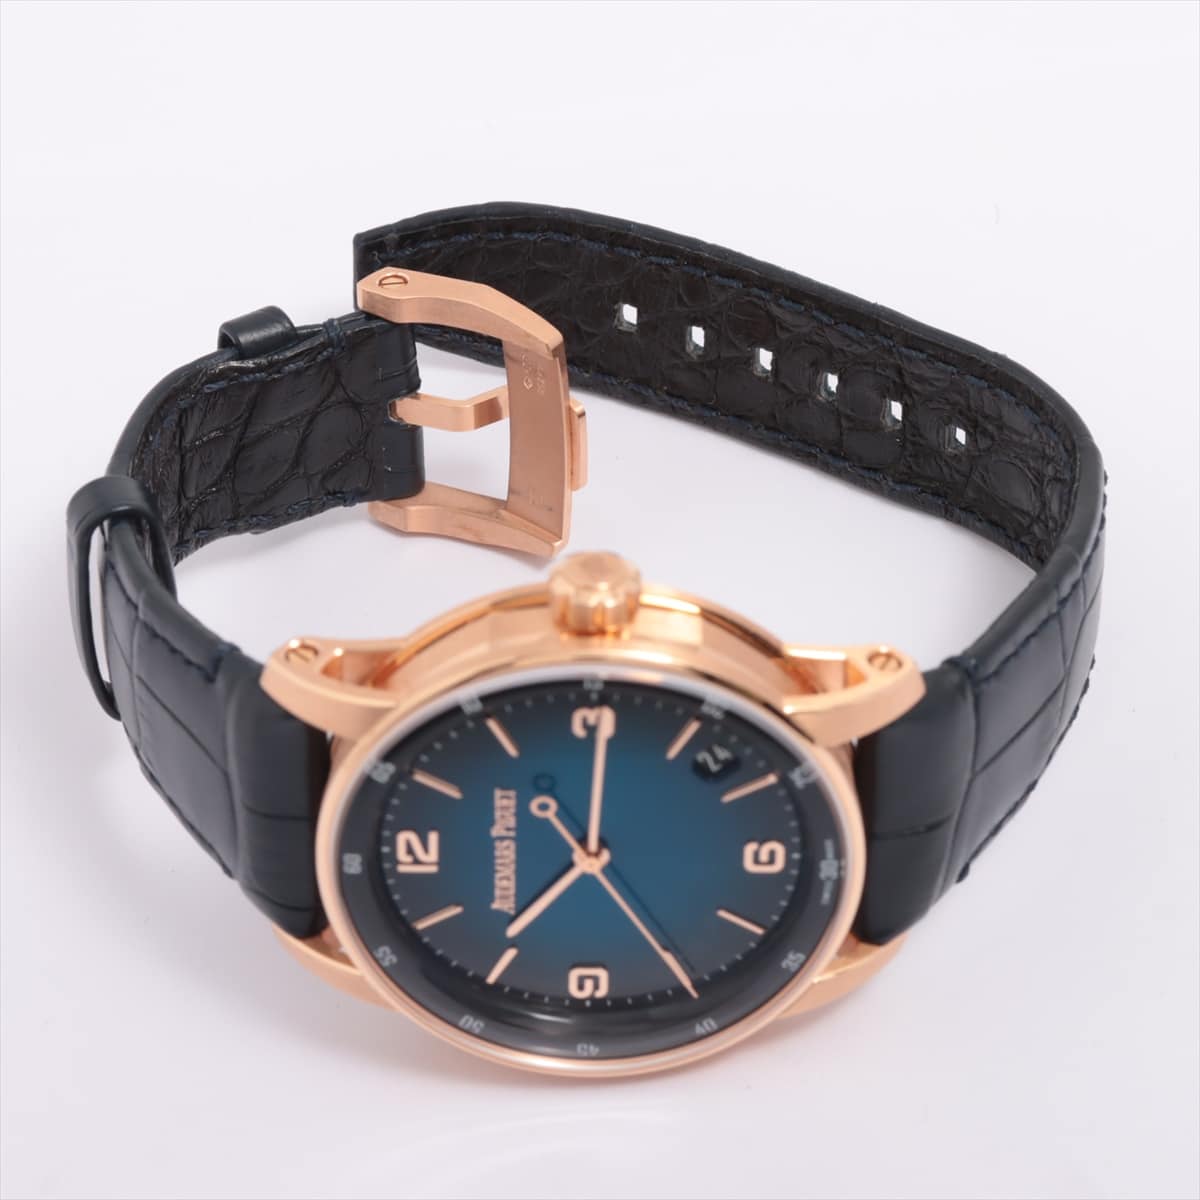 Audemars Piguet CODE11.59 15210OR.OO.A028CR.01  750 & leather AT Blue-Face